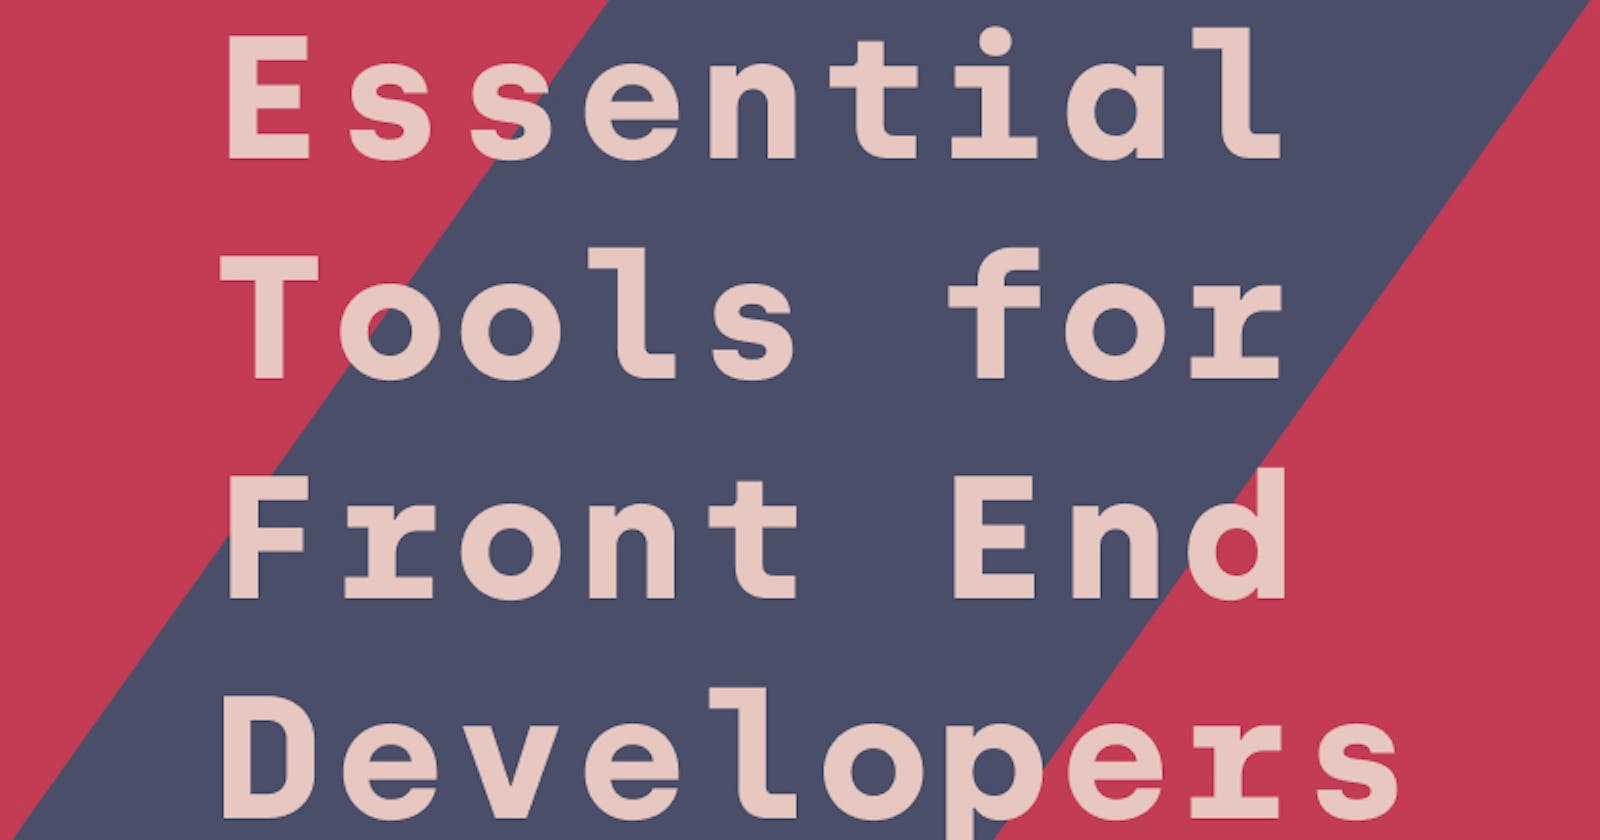 A Beginner’s List of Essential Tools for Front End Developers